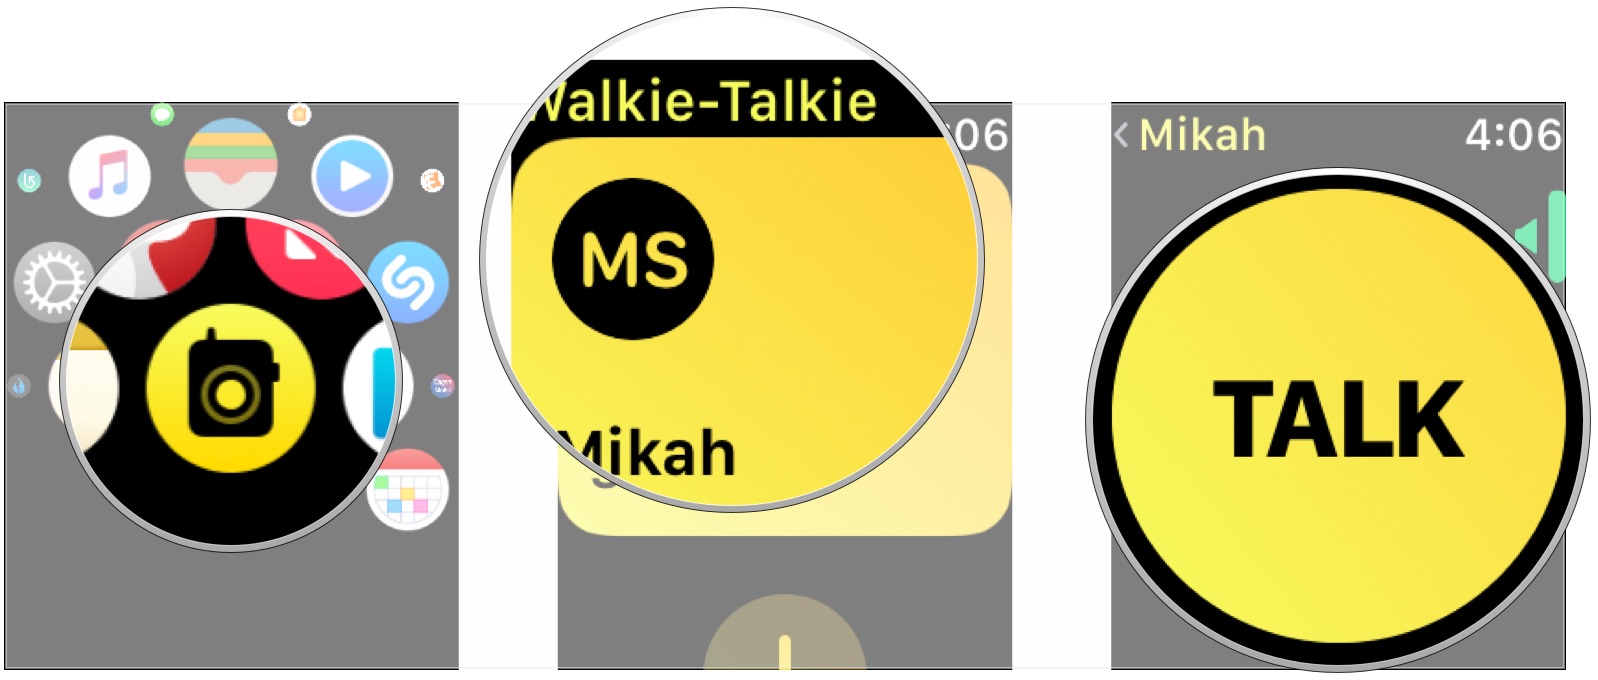 Open Walkie-Talkie, tap contact, tap and hold Talk